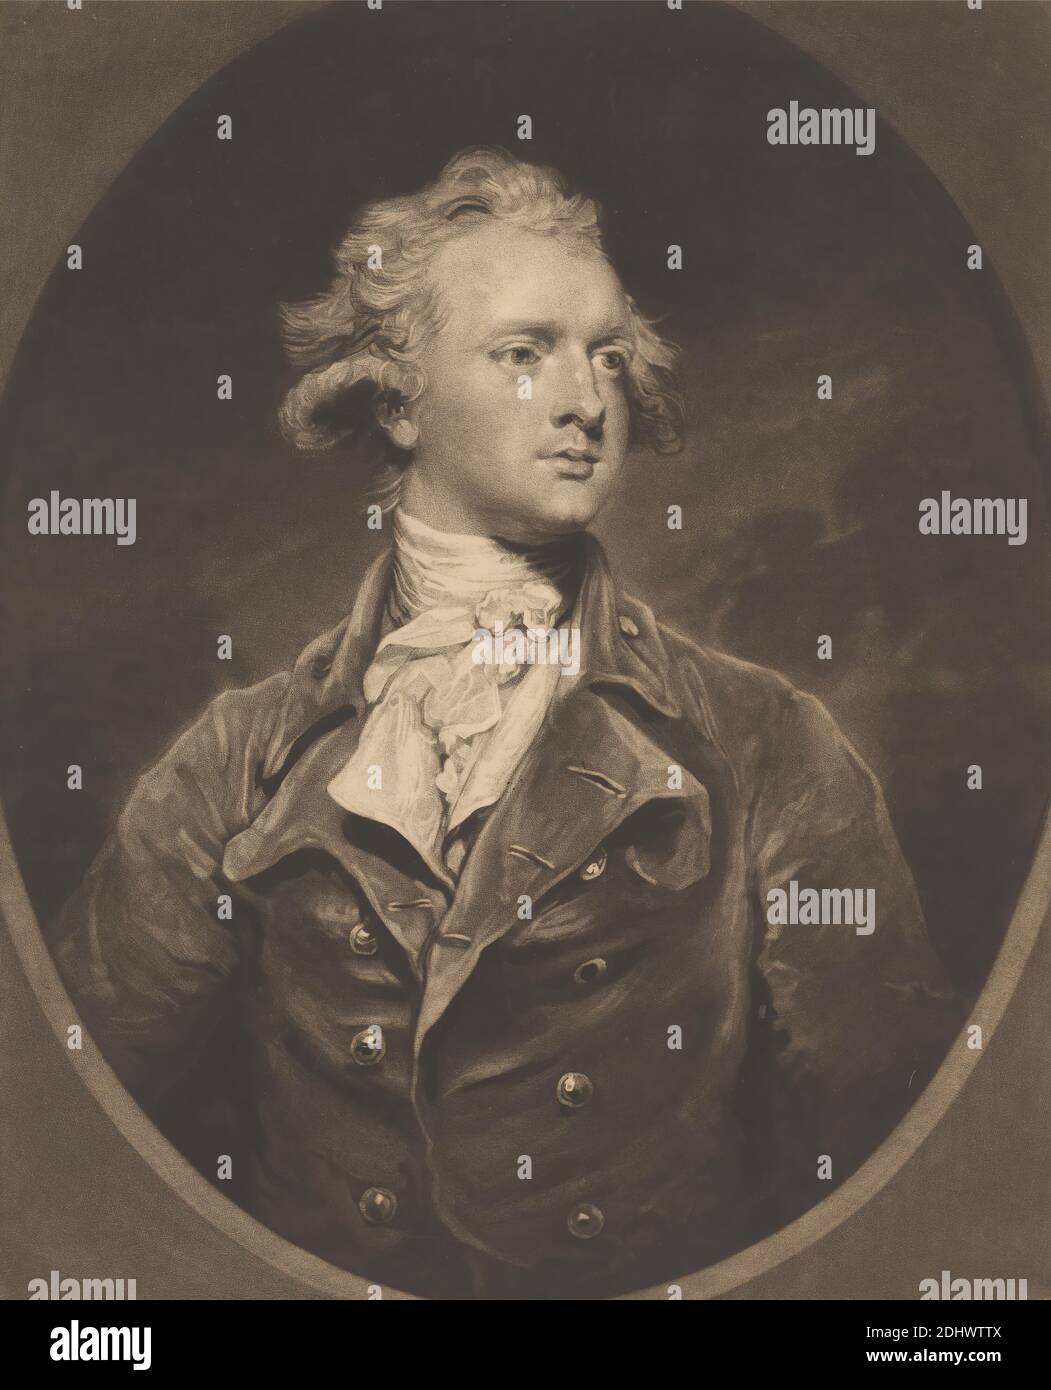 Sir Abraham Hume, Bart. F.R.S., Print made by John Jones, ca. 1745–1797, British, after Sir Joshua Reynolds RA, 1723–1792, British, 1783, Mezzotint on medium, slightly textured, beige, laid paper, Sheet: 15 1/8 × 11 1/8 inches (38.4 × 28.3 cm) and Image: 13 7/16 × 10 15/16 inches (34.1 × 27.8 cm Stock Photo